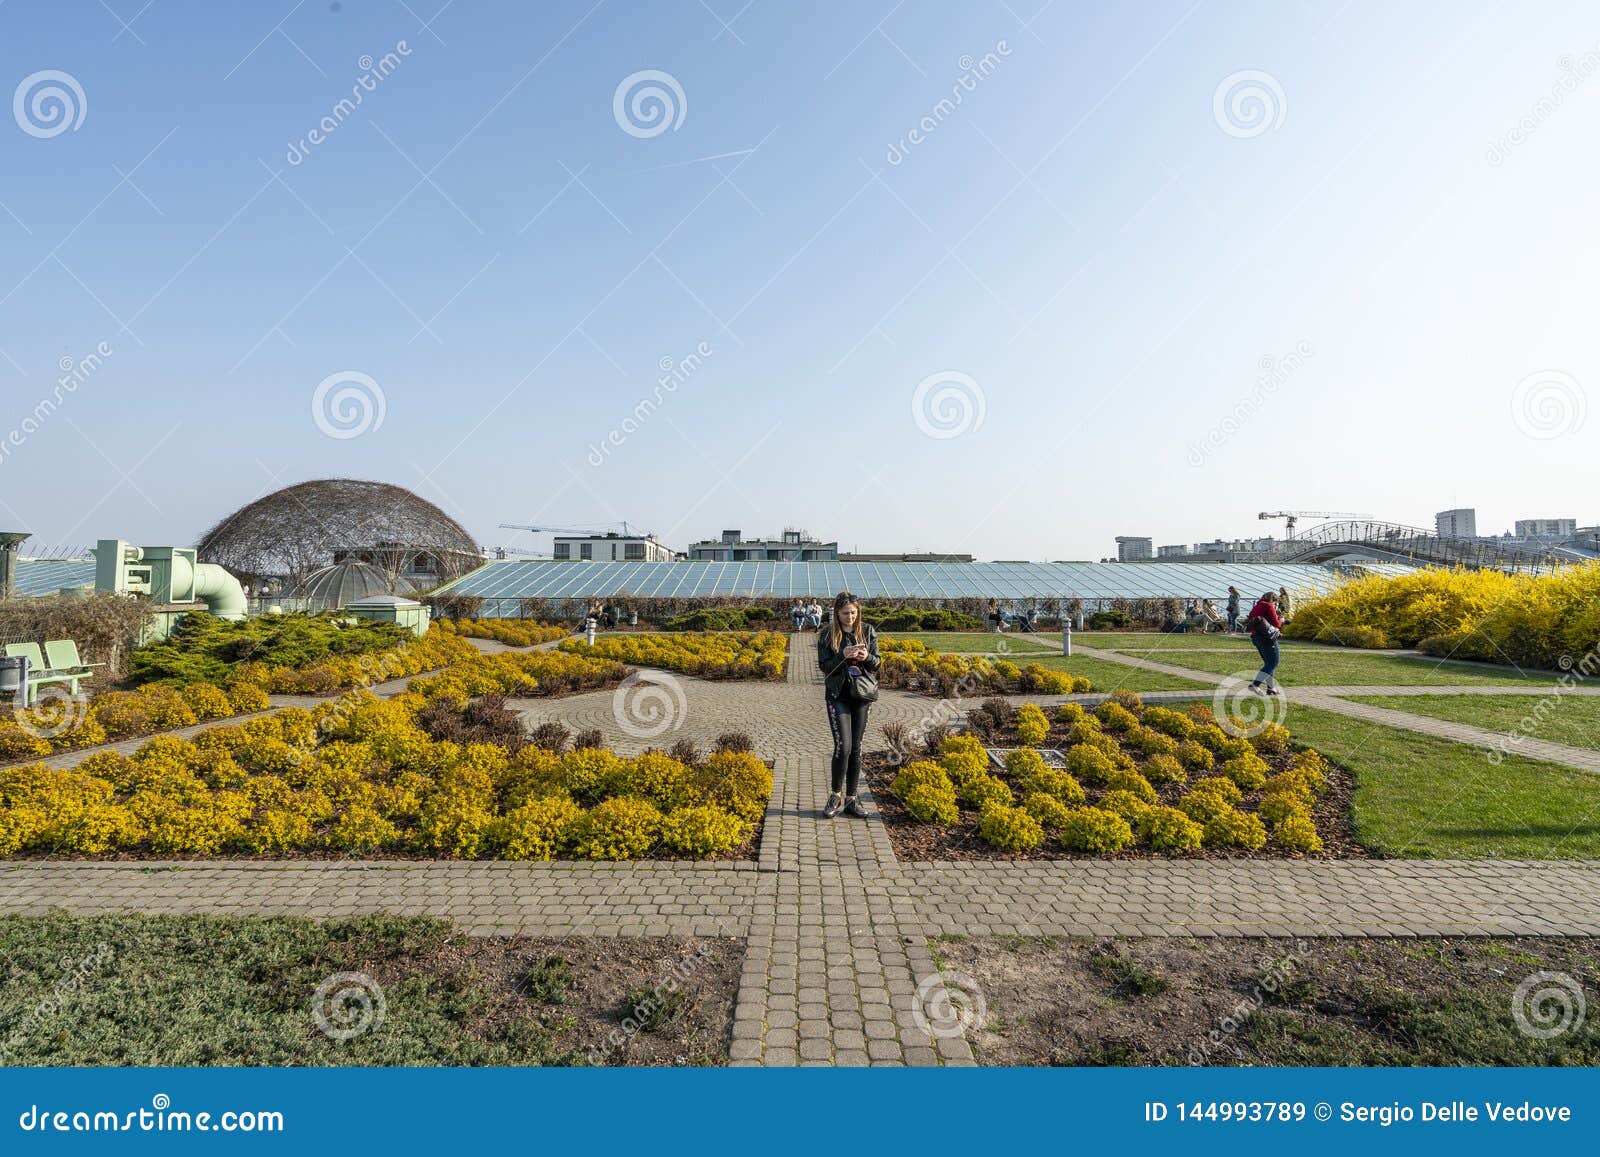 The Warsaw University Library Roofs Editorial Stock Image Image